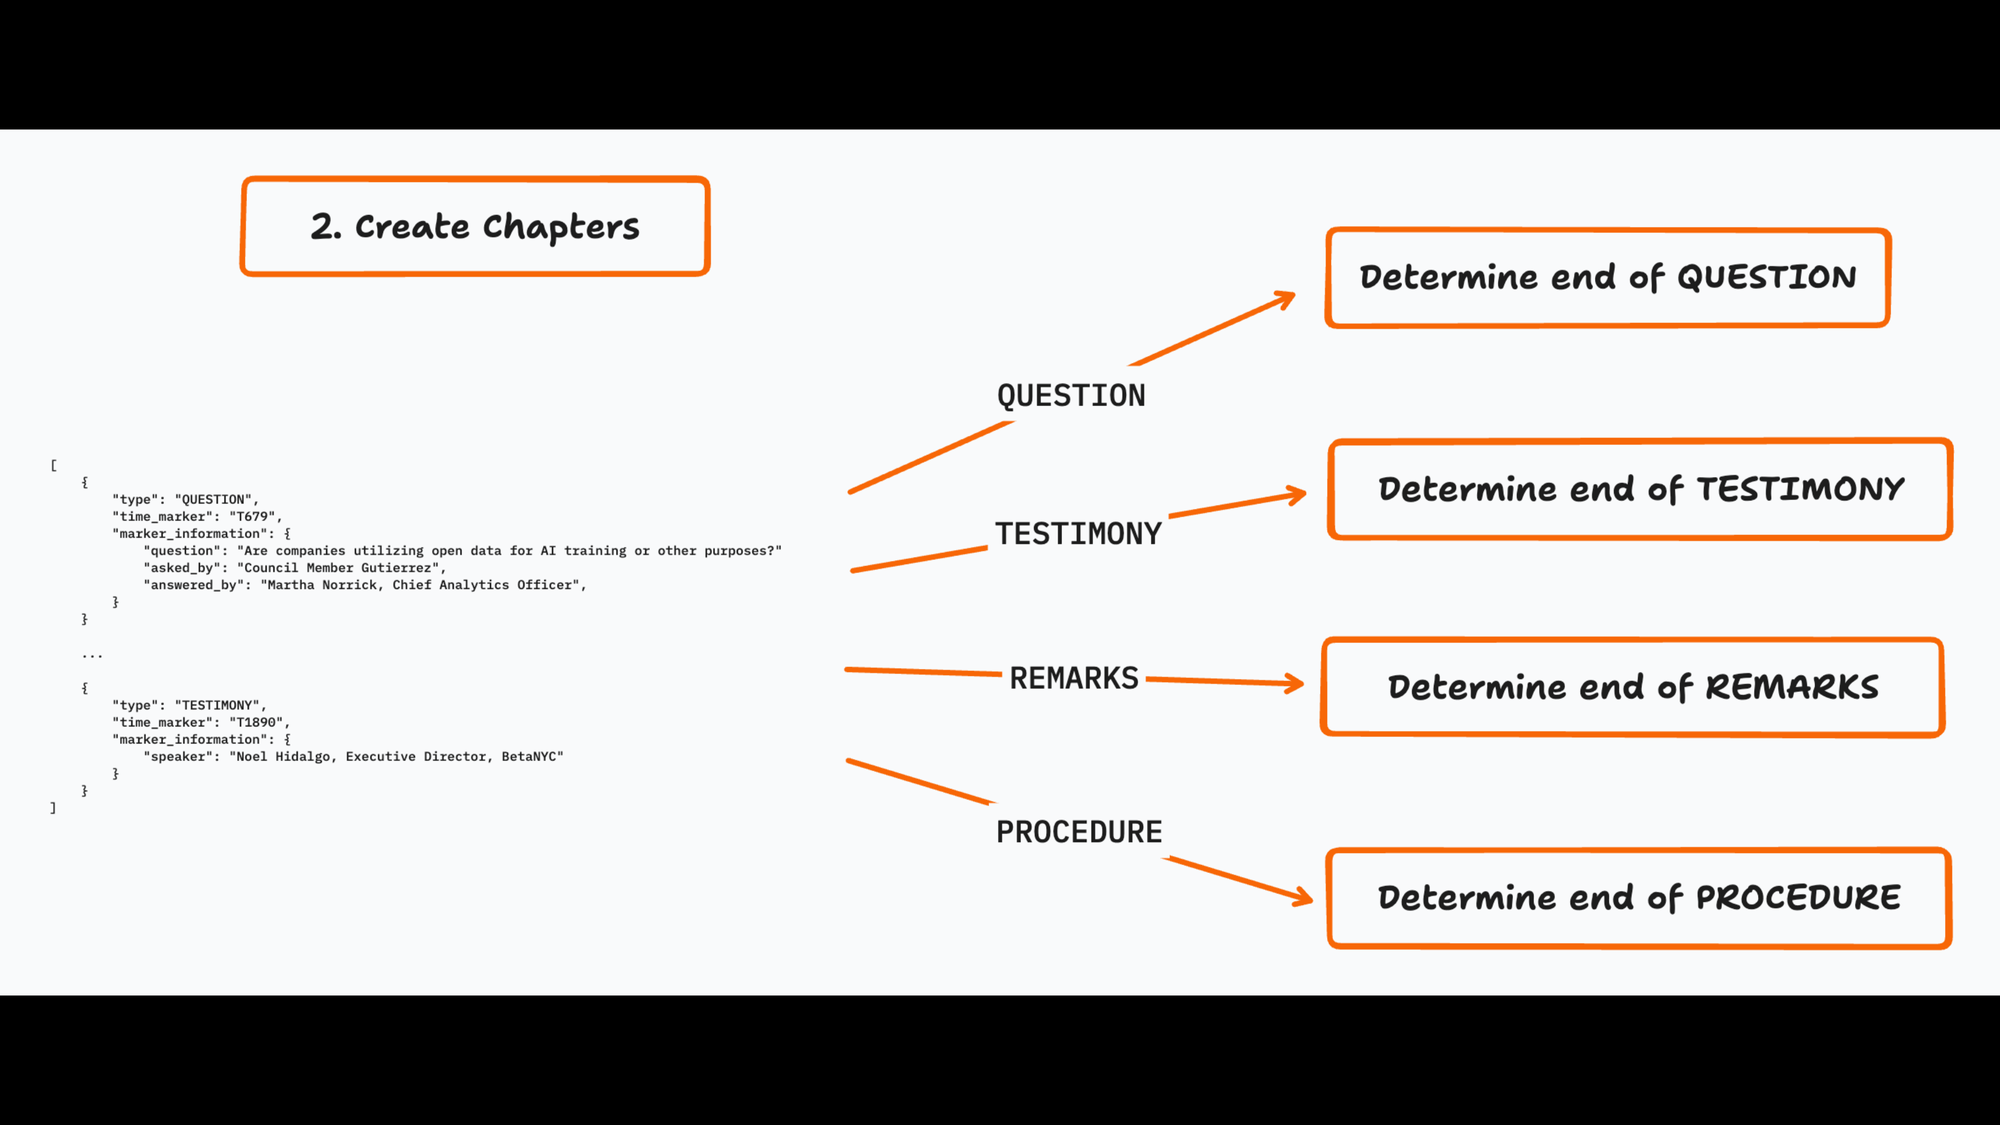 2. Create Chapters Determine end of QUESTION
QUESTION. Determine end of TESTIMONY. Determine end of REMARKS. Determine end of PROCEDURE.